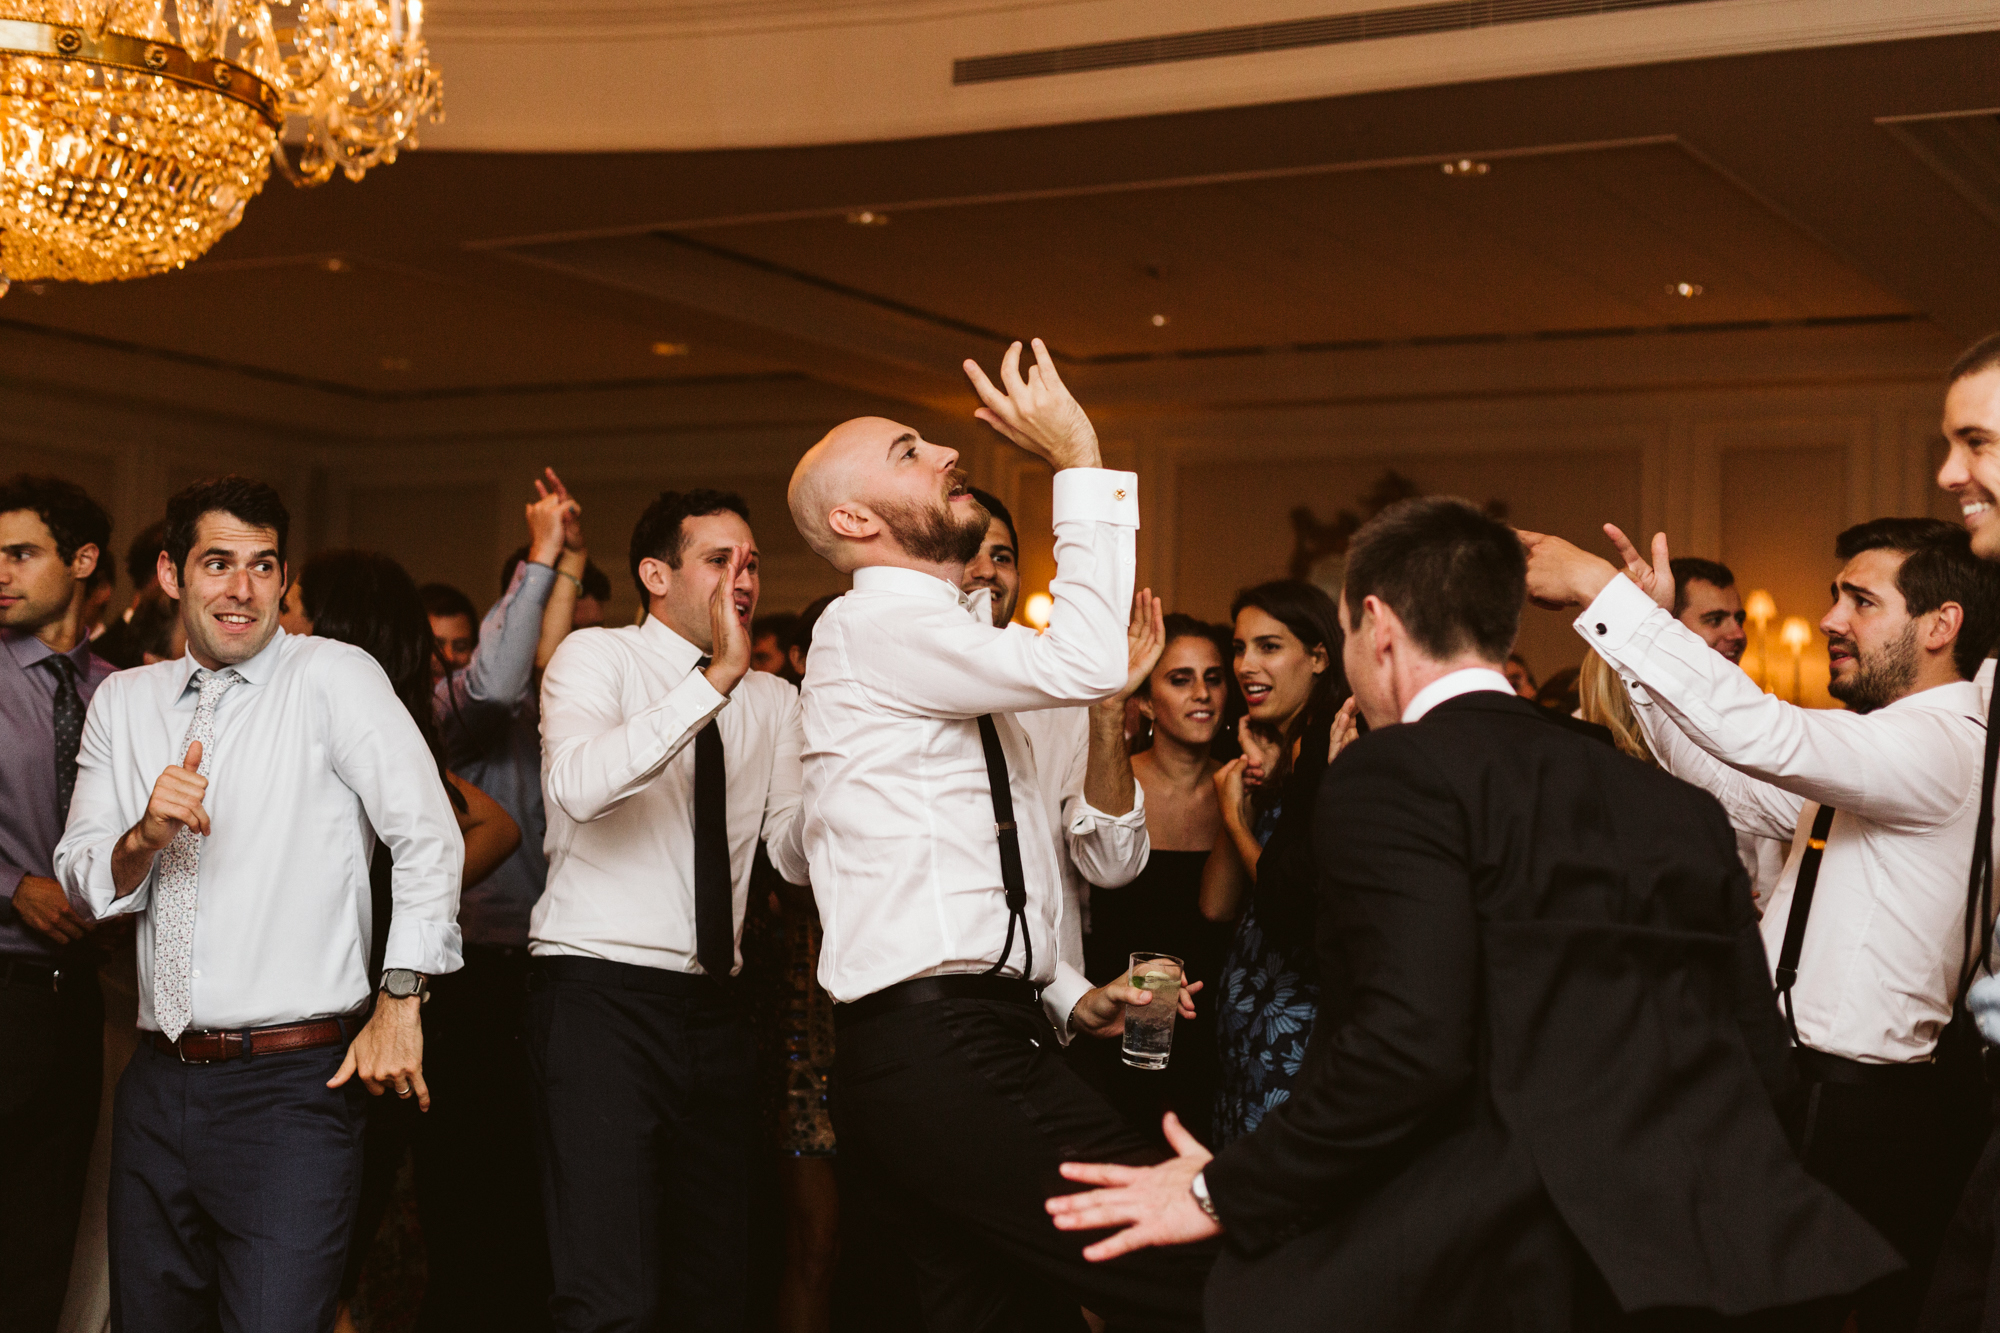 Elegant, Columbia Country Club, Chevy Chase Maryland, Baltimore Wedding Photographer, Classic, Traditional, Groom and Groomsmen Dancing at Reception, Bachelor Boys Band